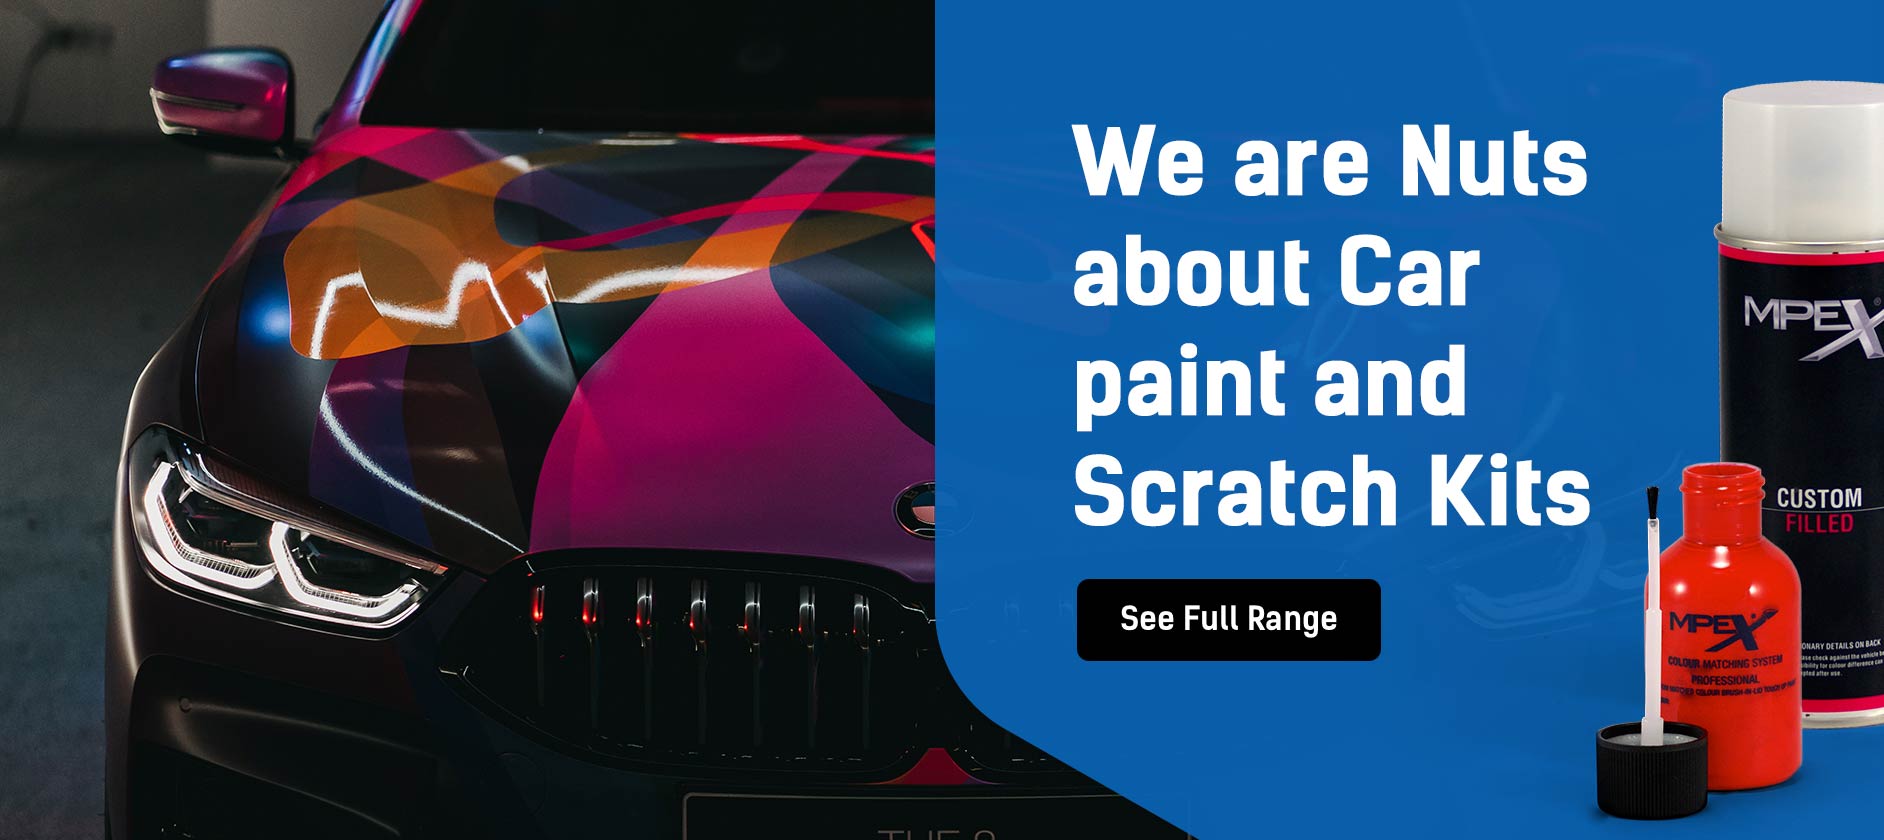 We are Nuts about Car paint and Scratch Kits